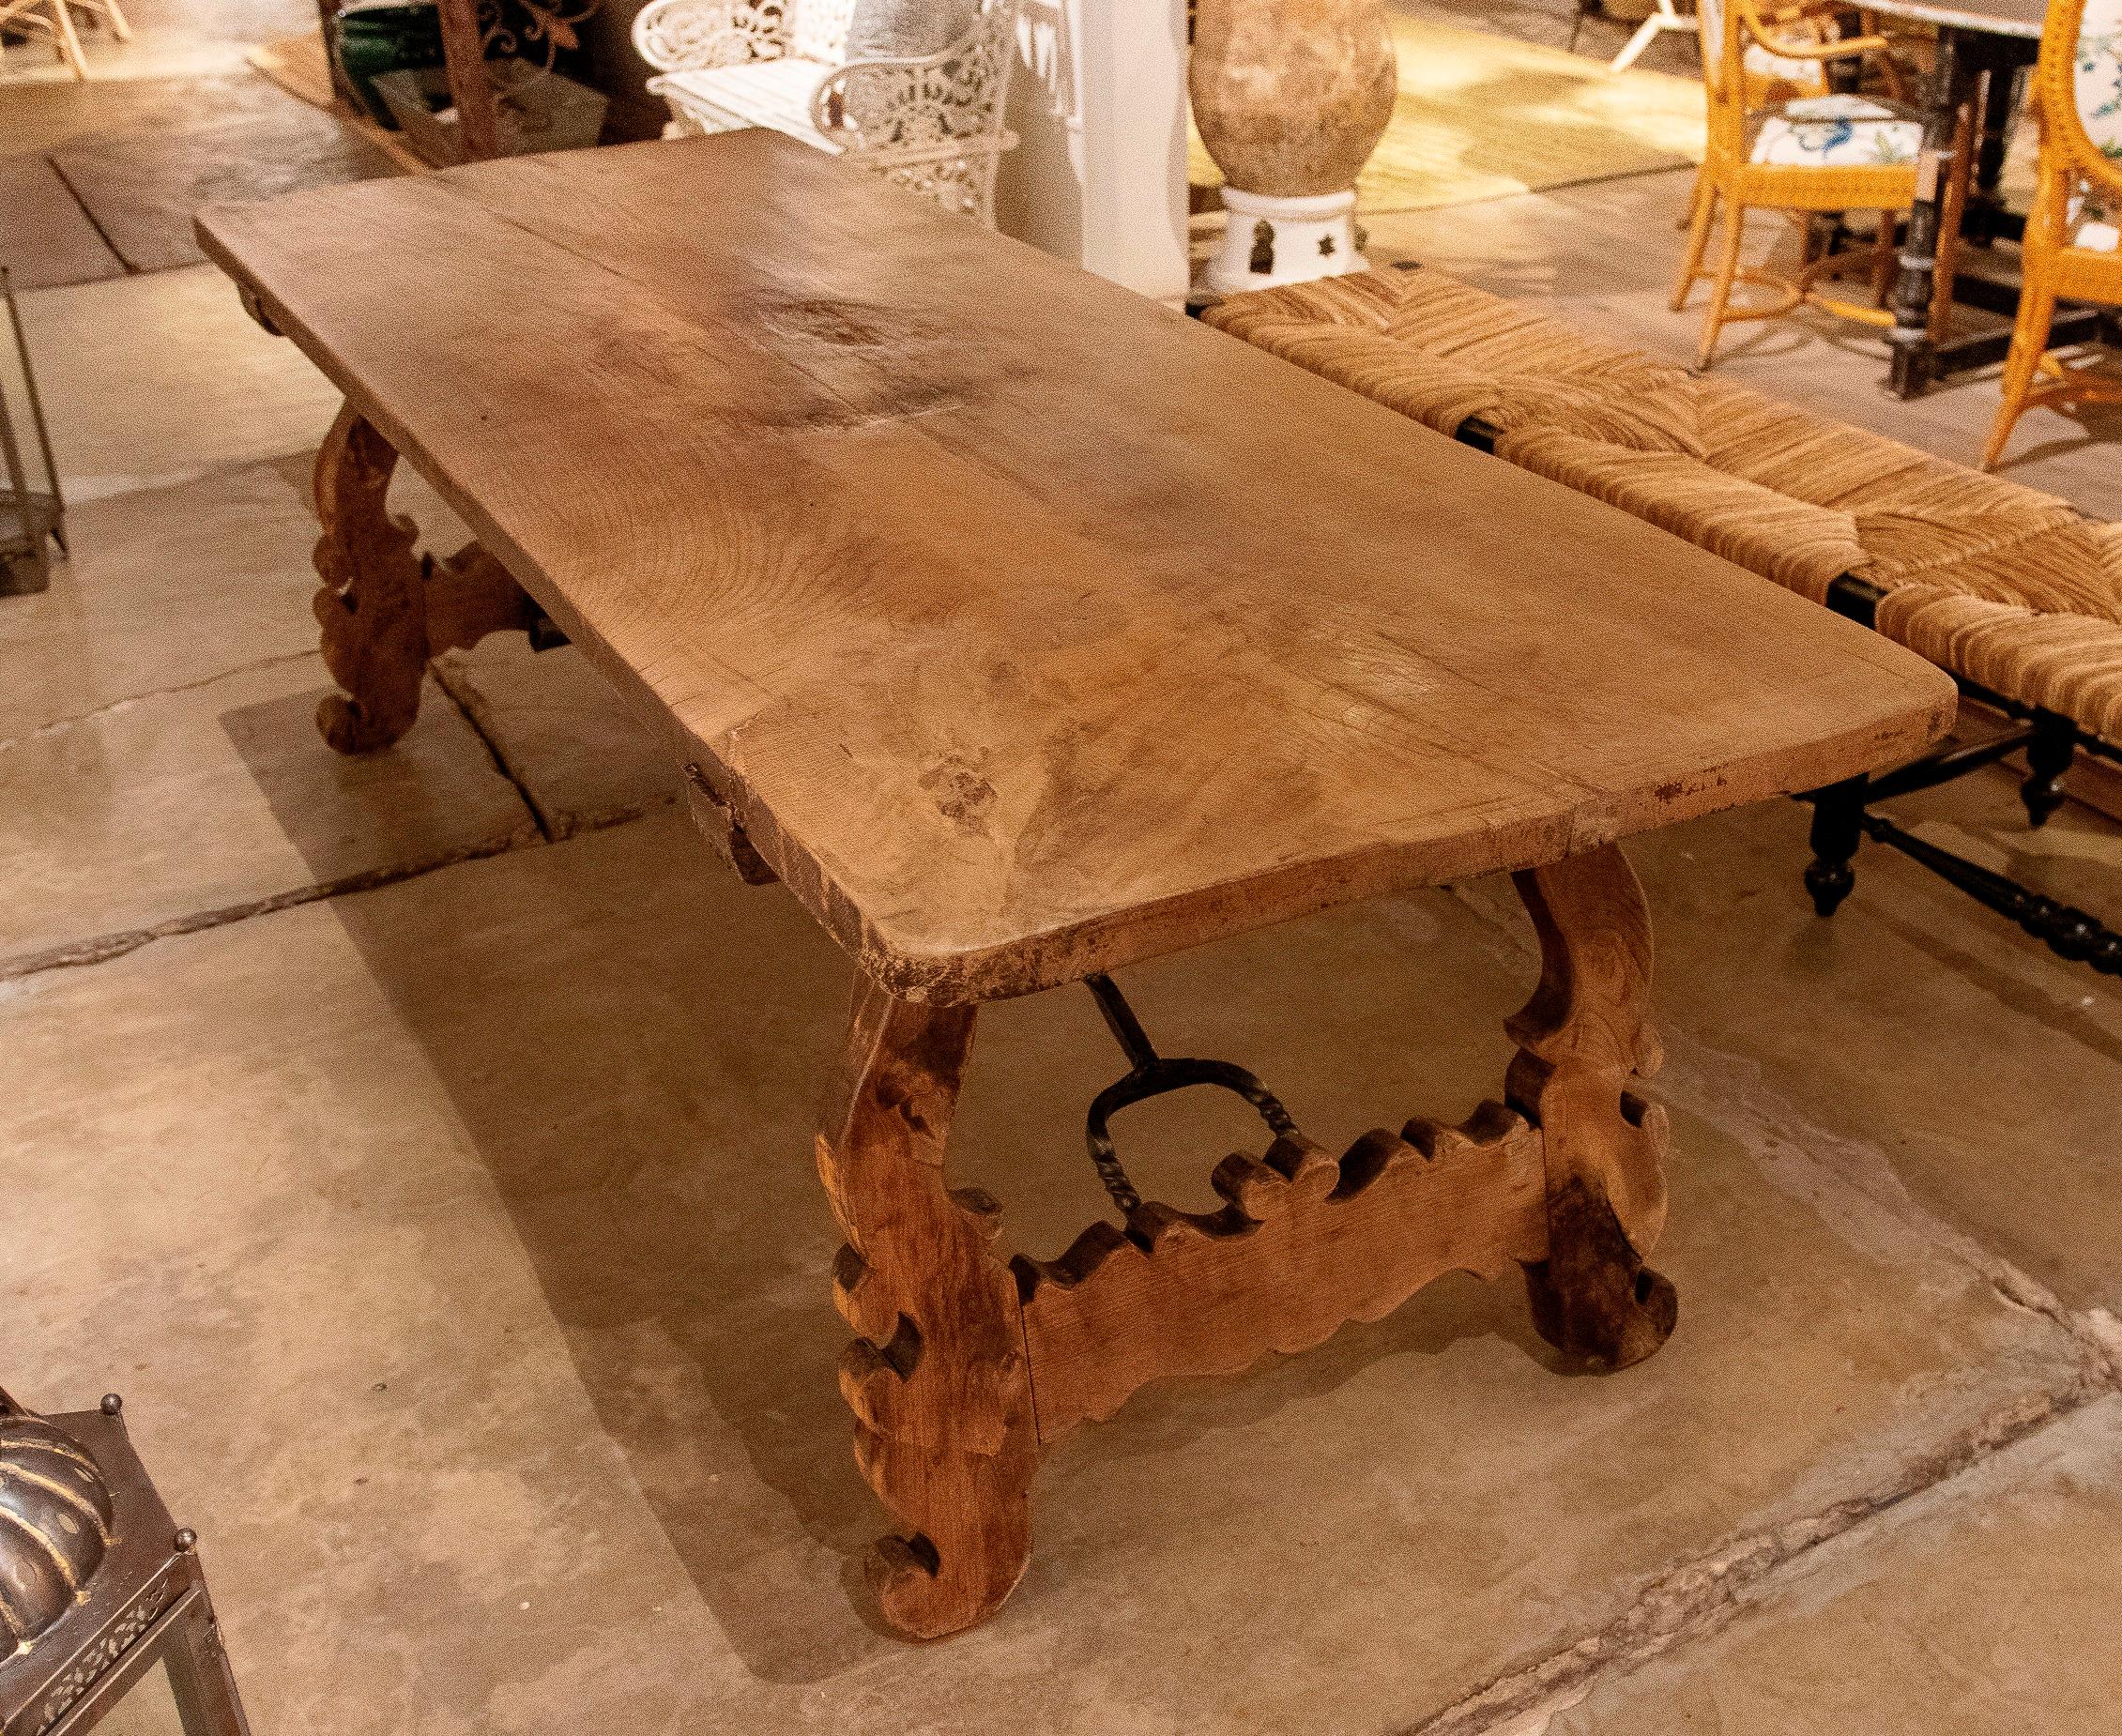 Spanish Large Wooden Table with Hand-Carved Legs and Original Iron Fittings For Sale 2